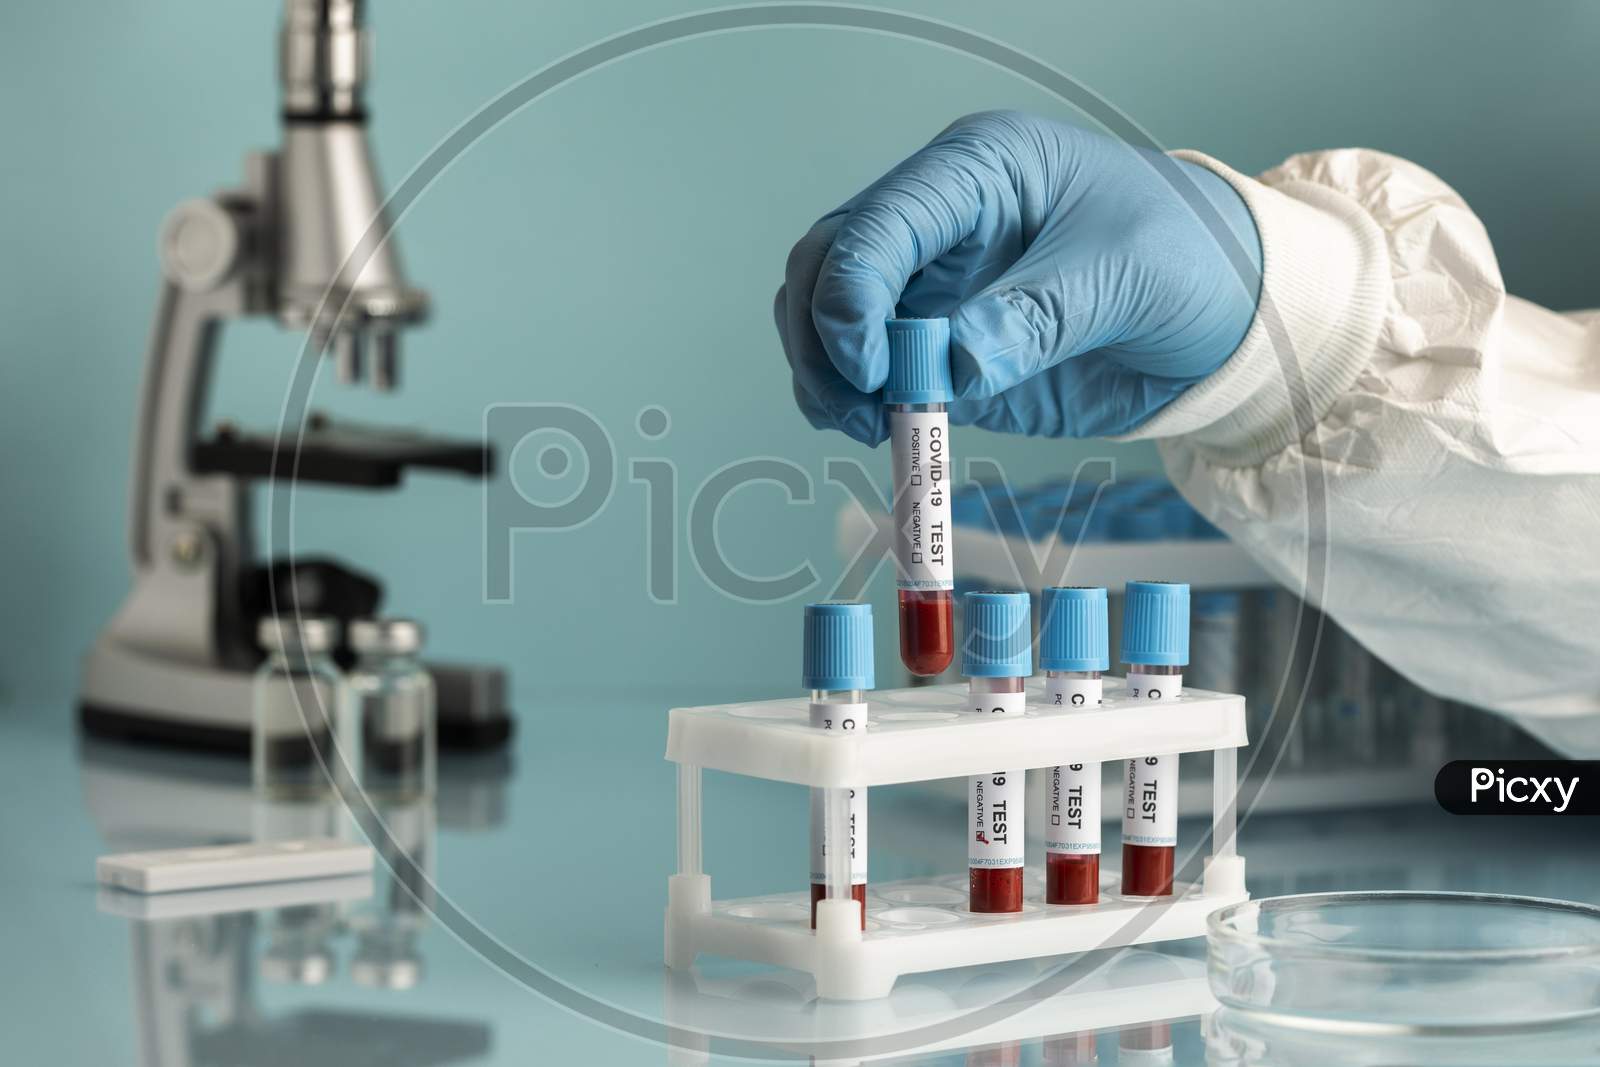 Hand with protective gloves holding a blood samples for covid test